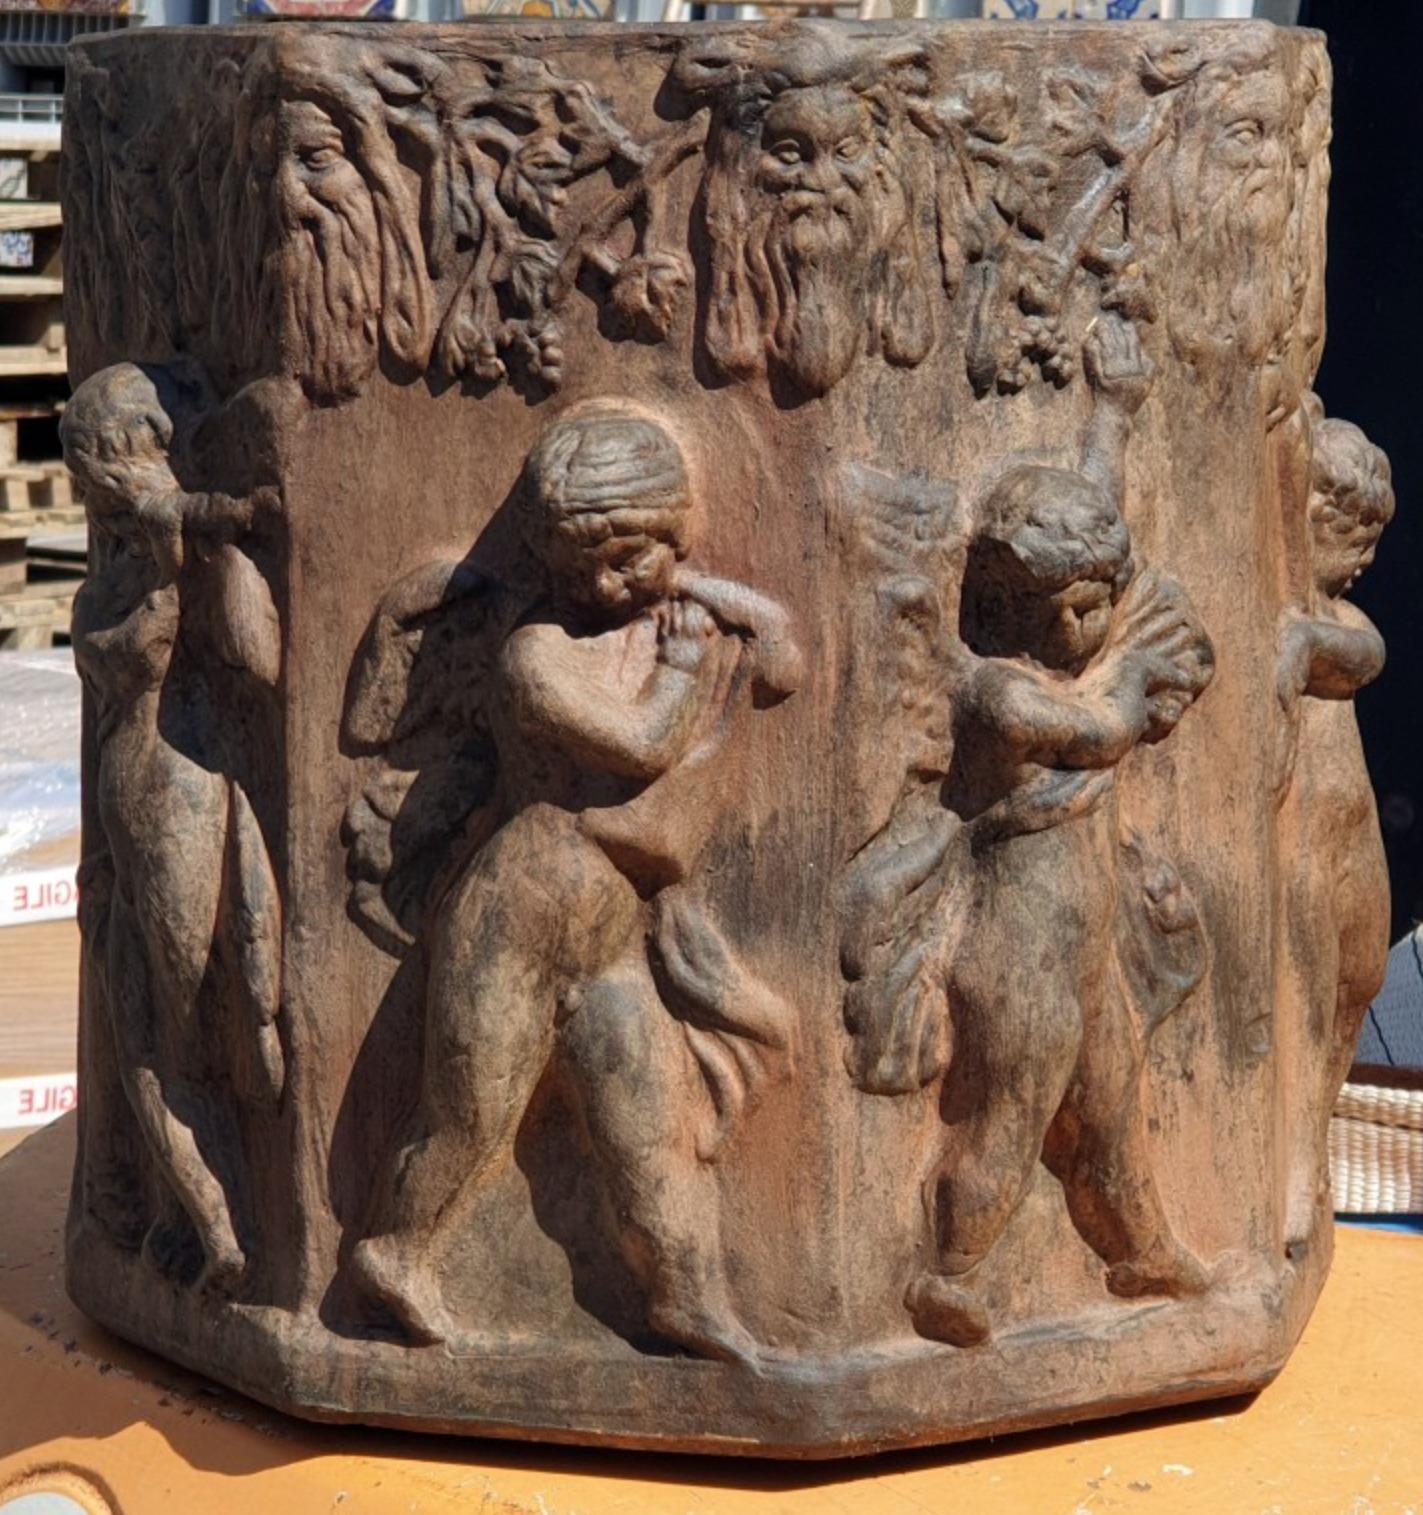 Octagonal cachepot ornated with putti in Tuscan Terracotta
Measures: Height: 30cm
Diameter: 30cm
10kg
20th Century
Good conditions.